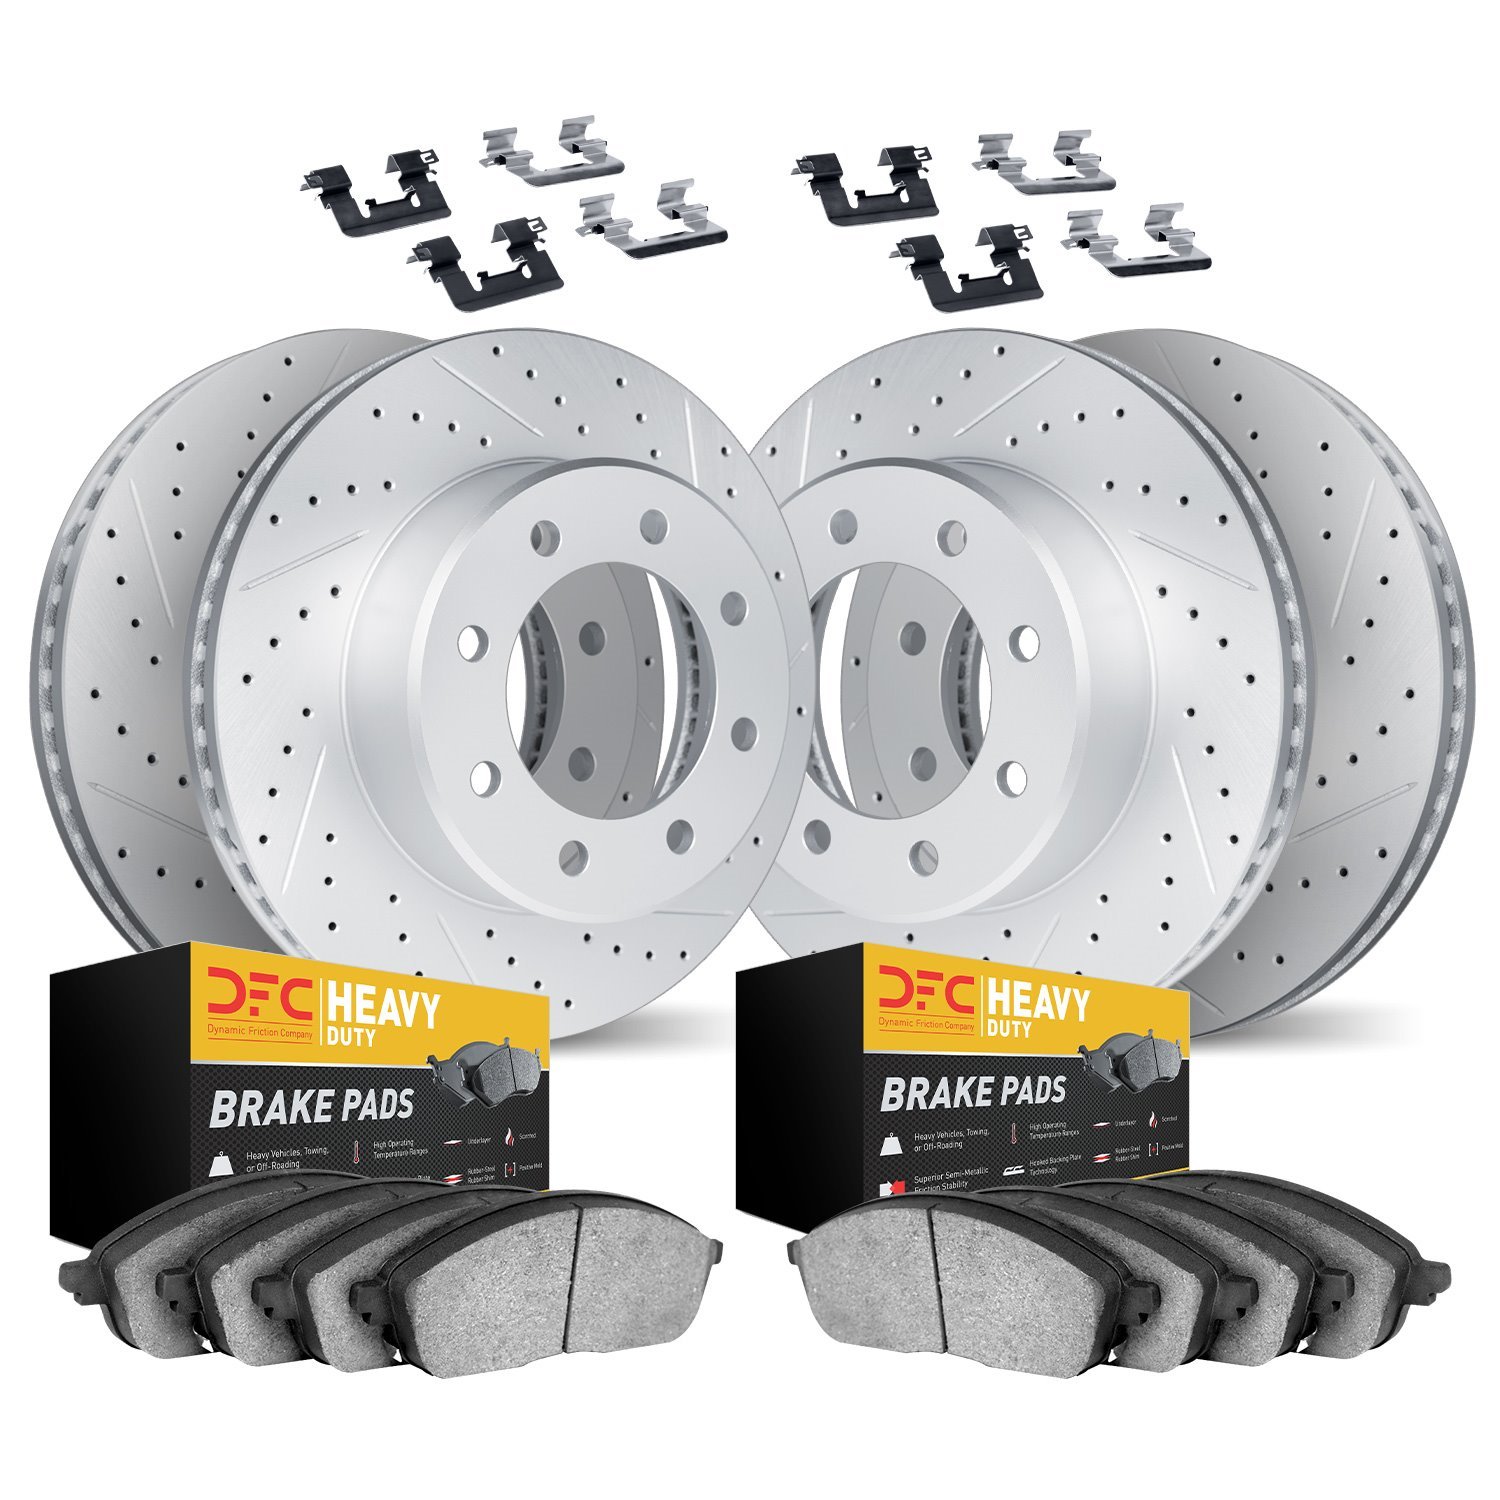 2214-99055 Geoperformance Drilled/Slotted Rotors w/Heavy-Duty Pads Kit & Hardware, 1999-2005 Ford/Lincoln/Mercury/Mazda, Positio